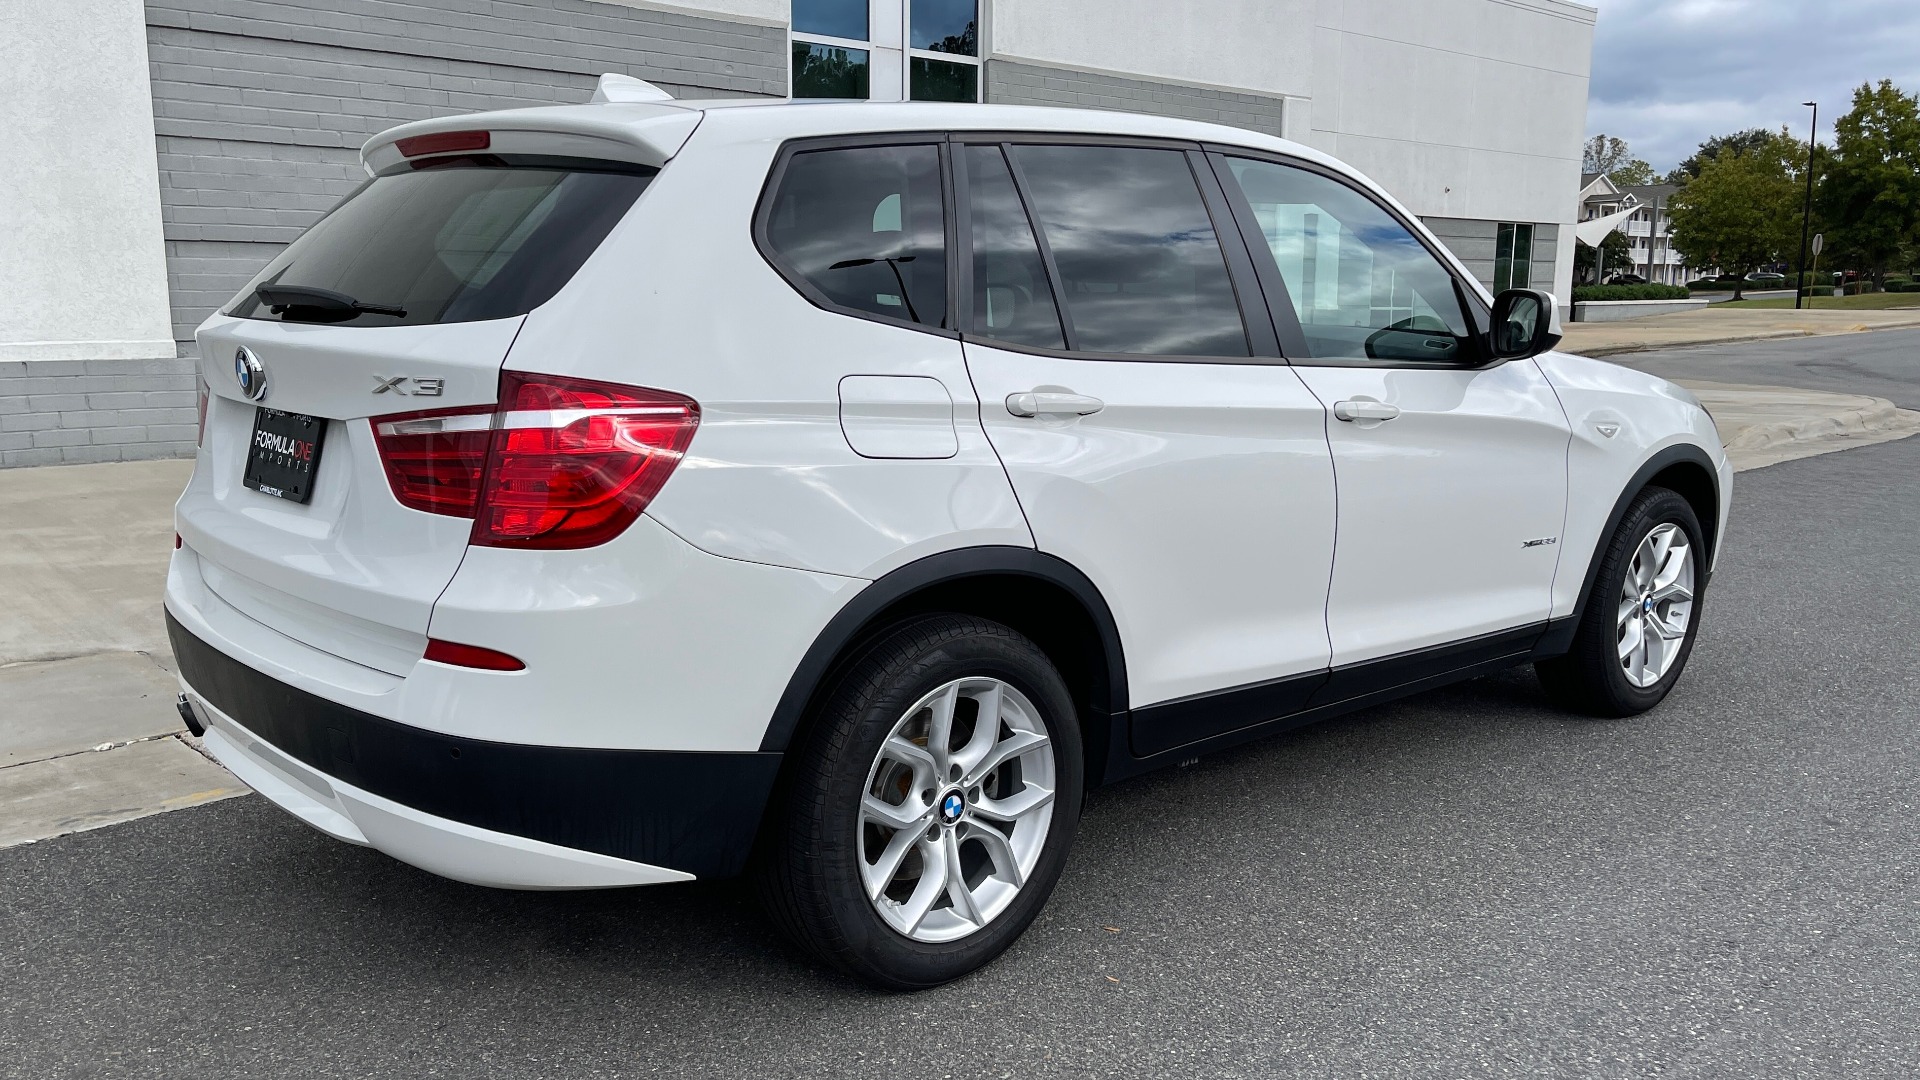 Used 2013 BMW X3 XDRIVE35I PREMIUM / TECHNOLOGY / COLD WTHR / REARVIEW for sale Sold at Formula Imports in Charlotte NC 28227 5